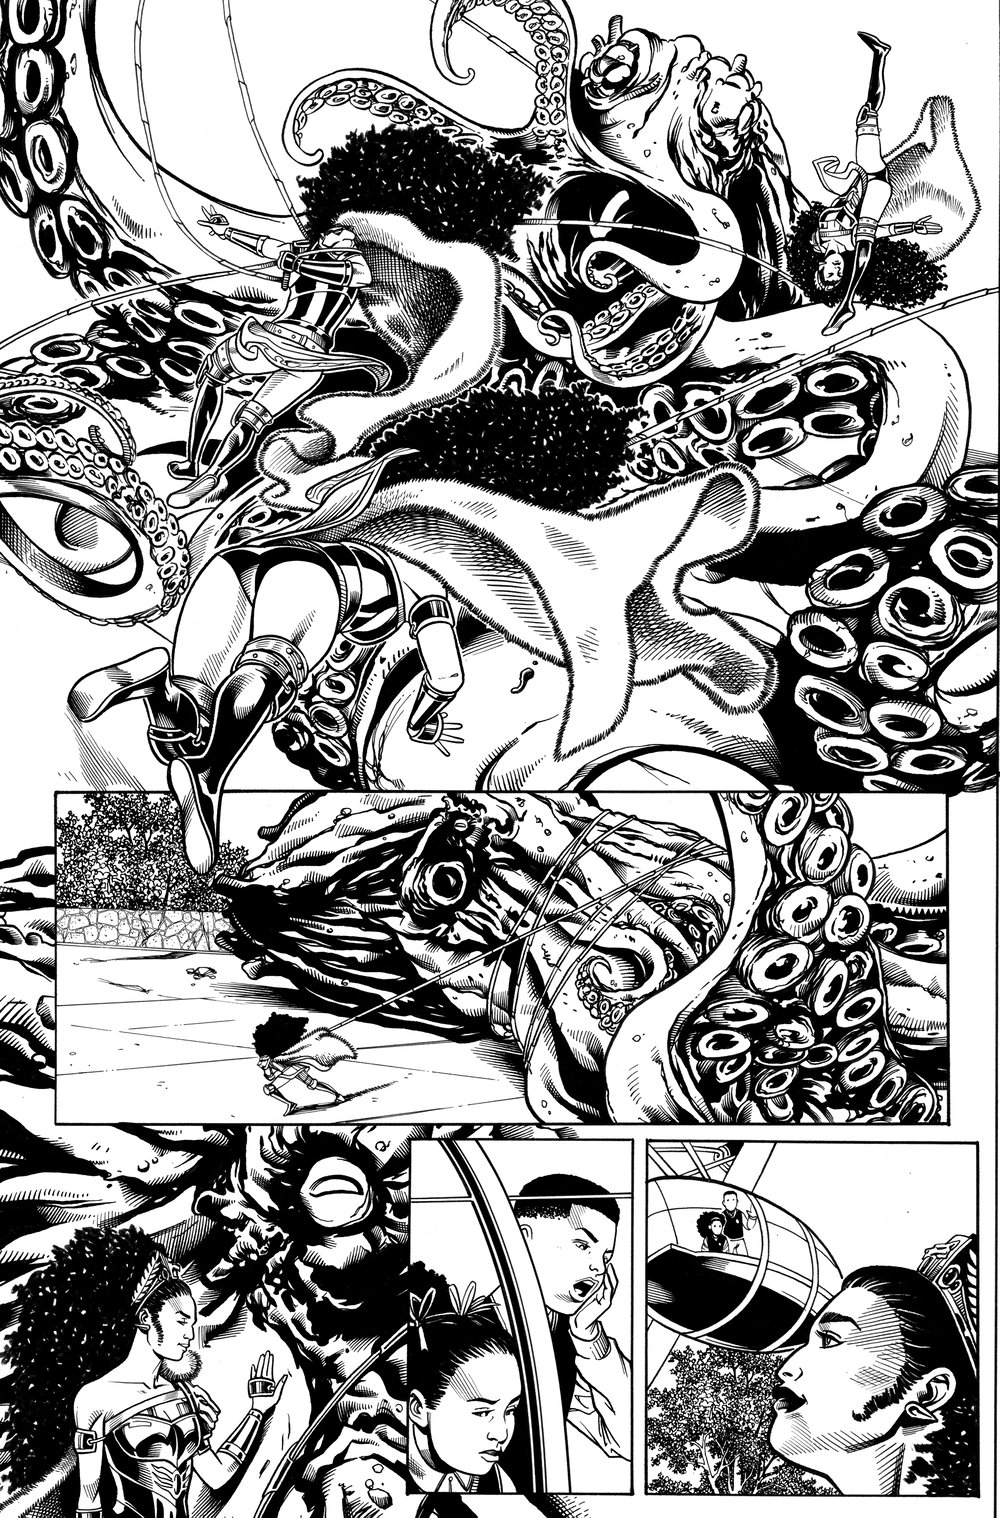 Image of Nubia and the Justice League #1 PG 8